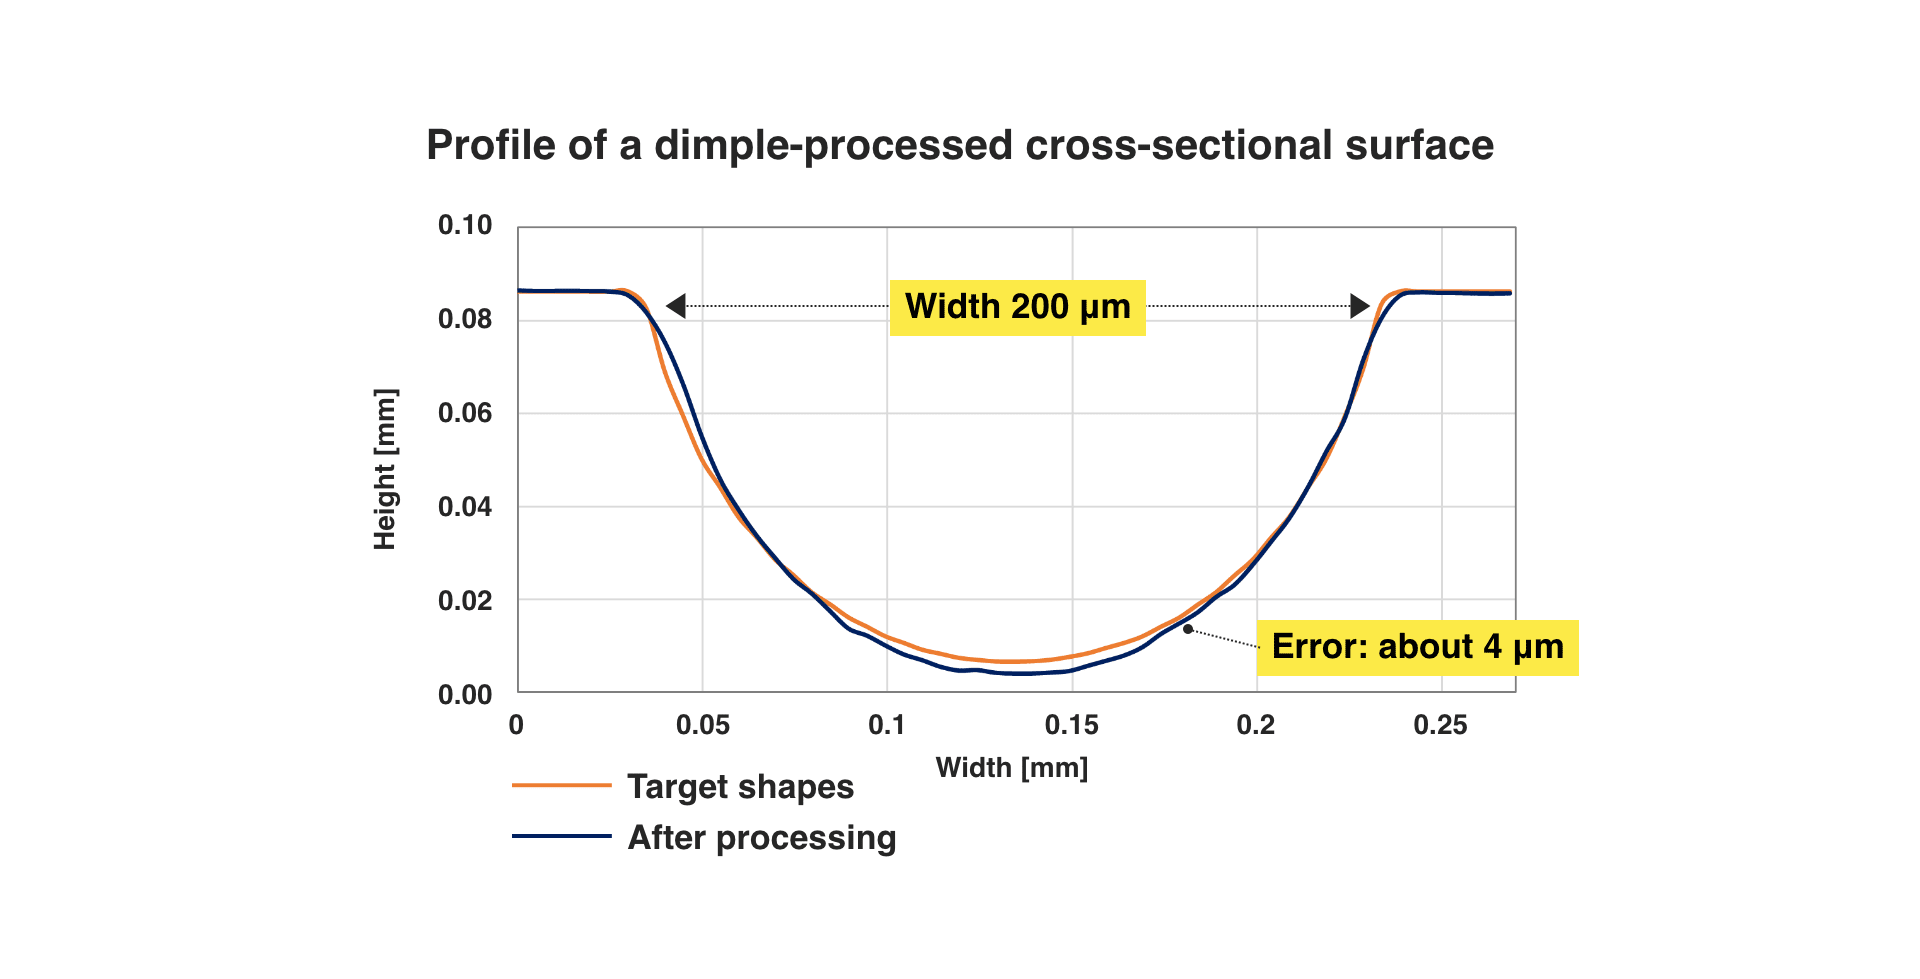 Comparative data between processing results and target shapes